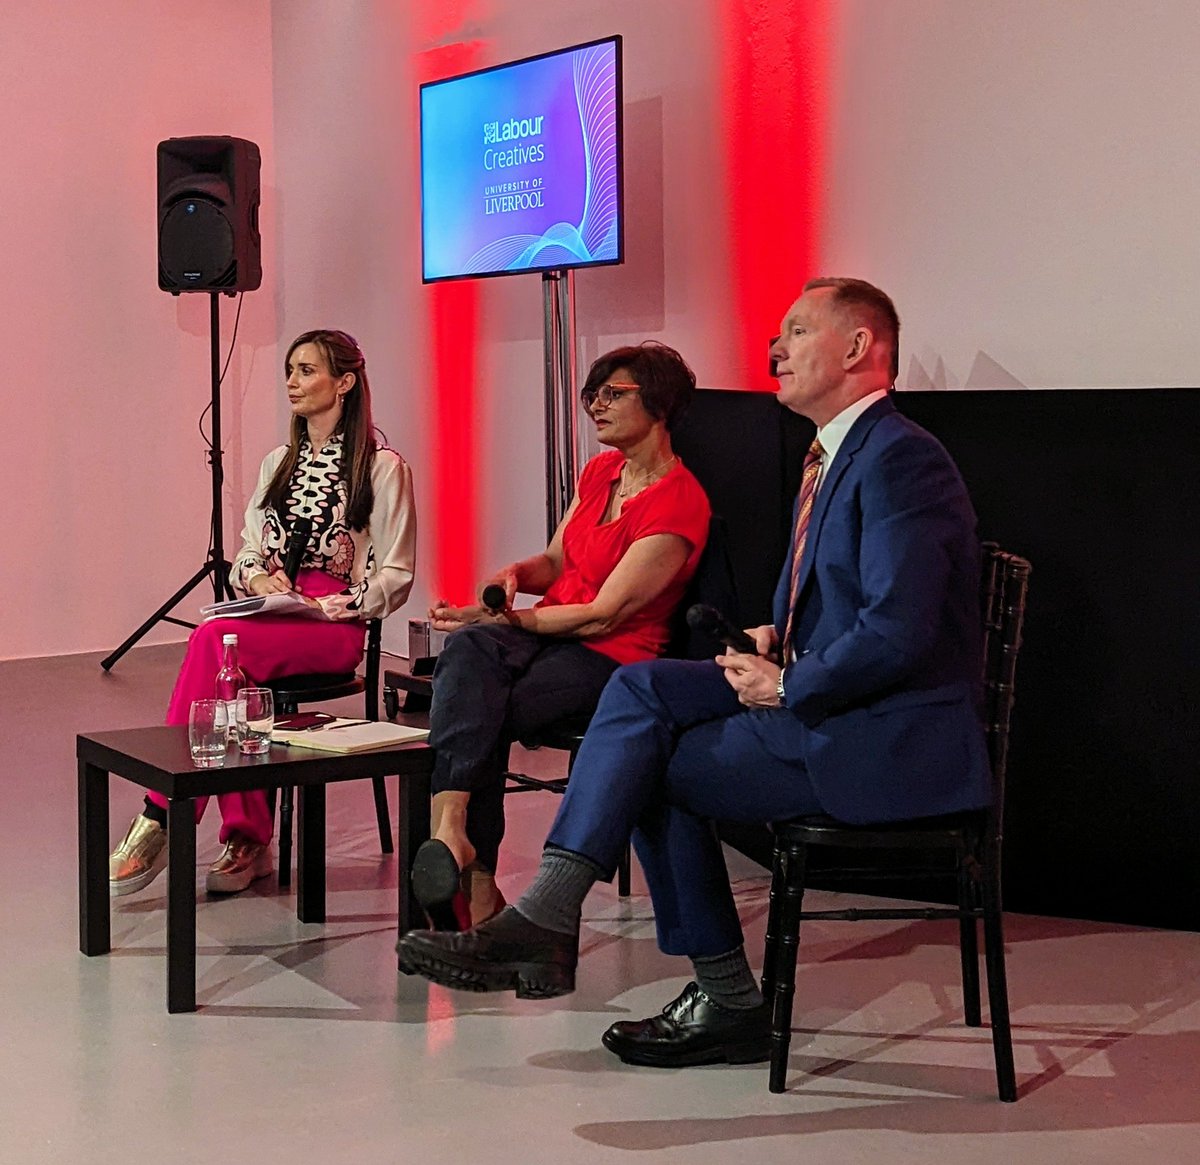 @tateliverpool @LabourCreatives ... the creative industries are central to achieving @UKLabour's number one mission of achieving the highest growth in the G7 by 2030, but they'll need every sector's input #Lab23 #LPC23